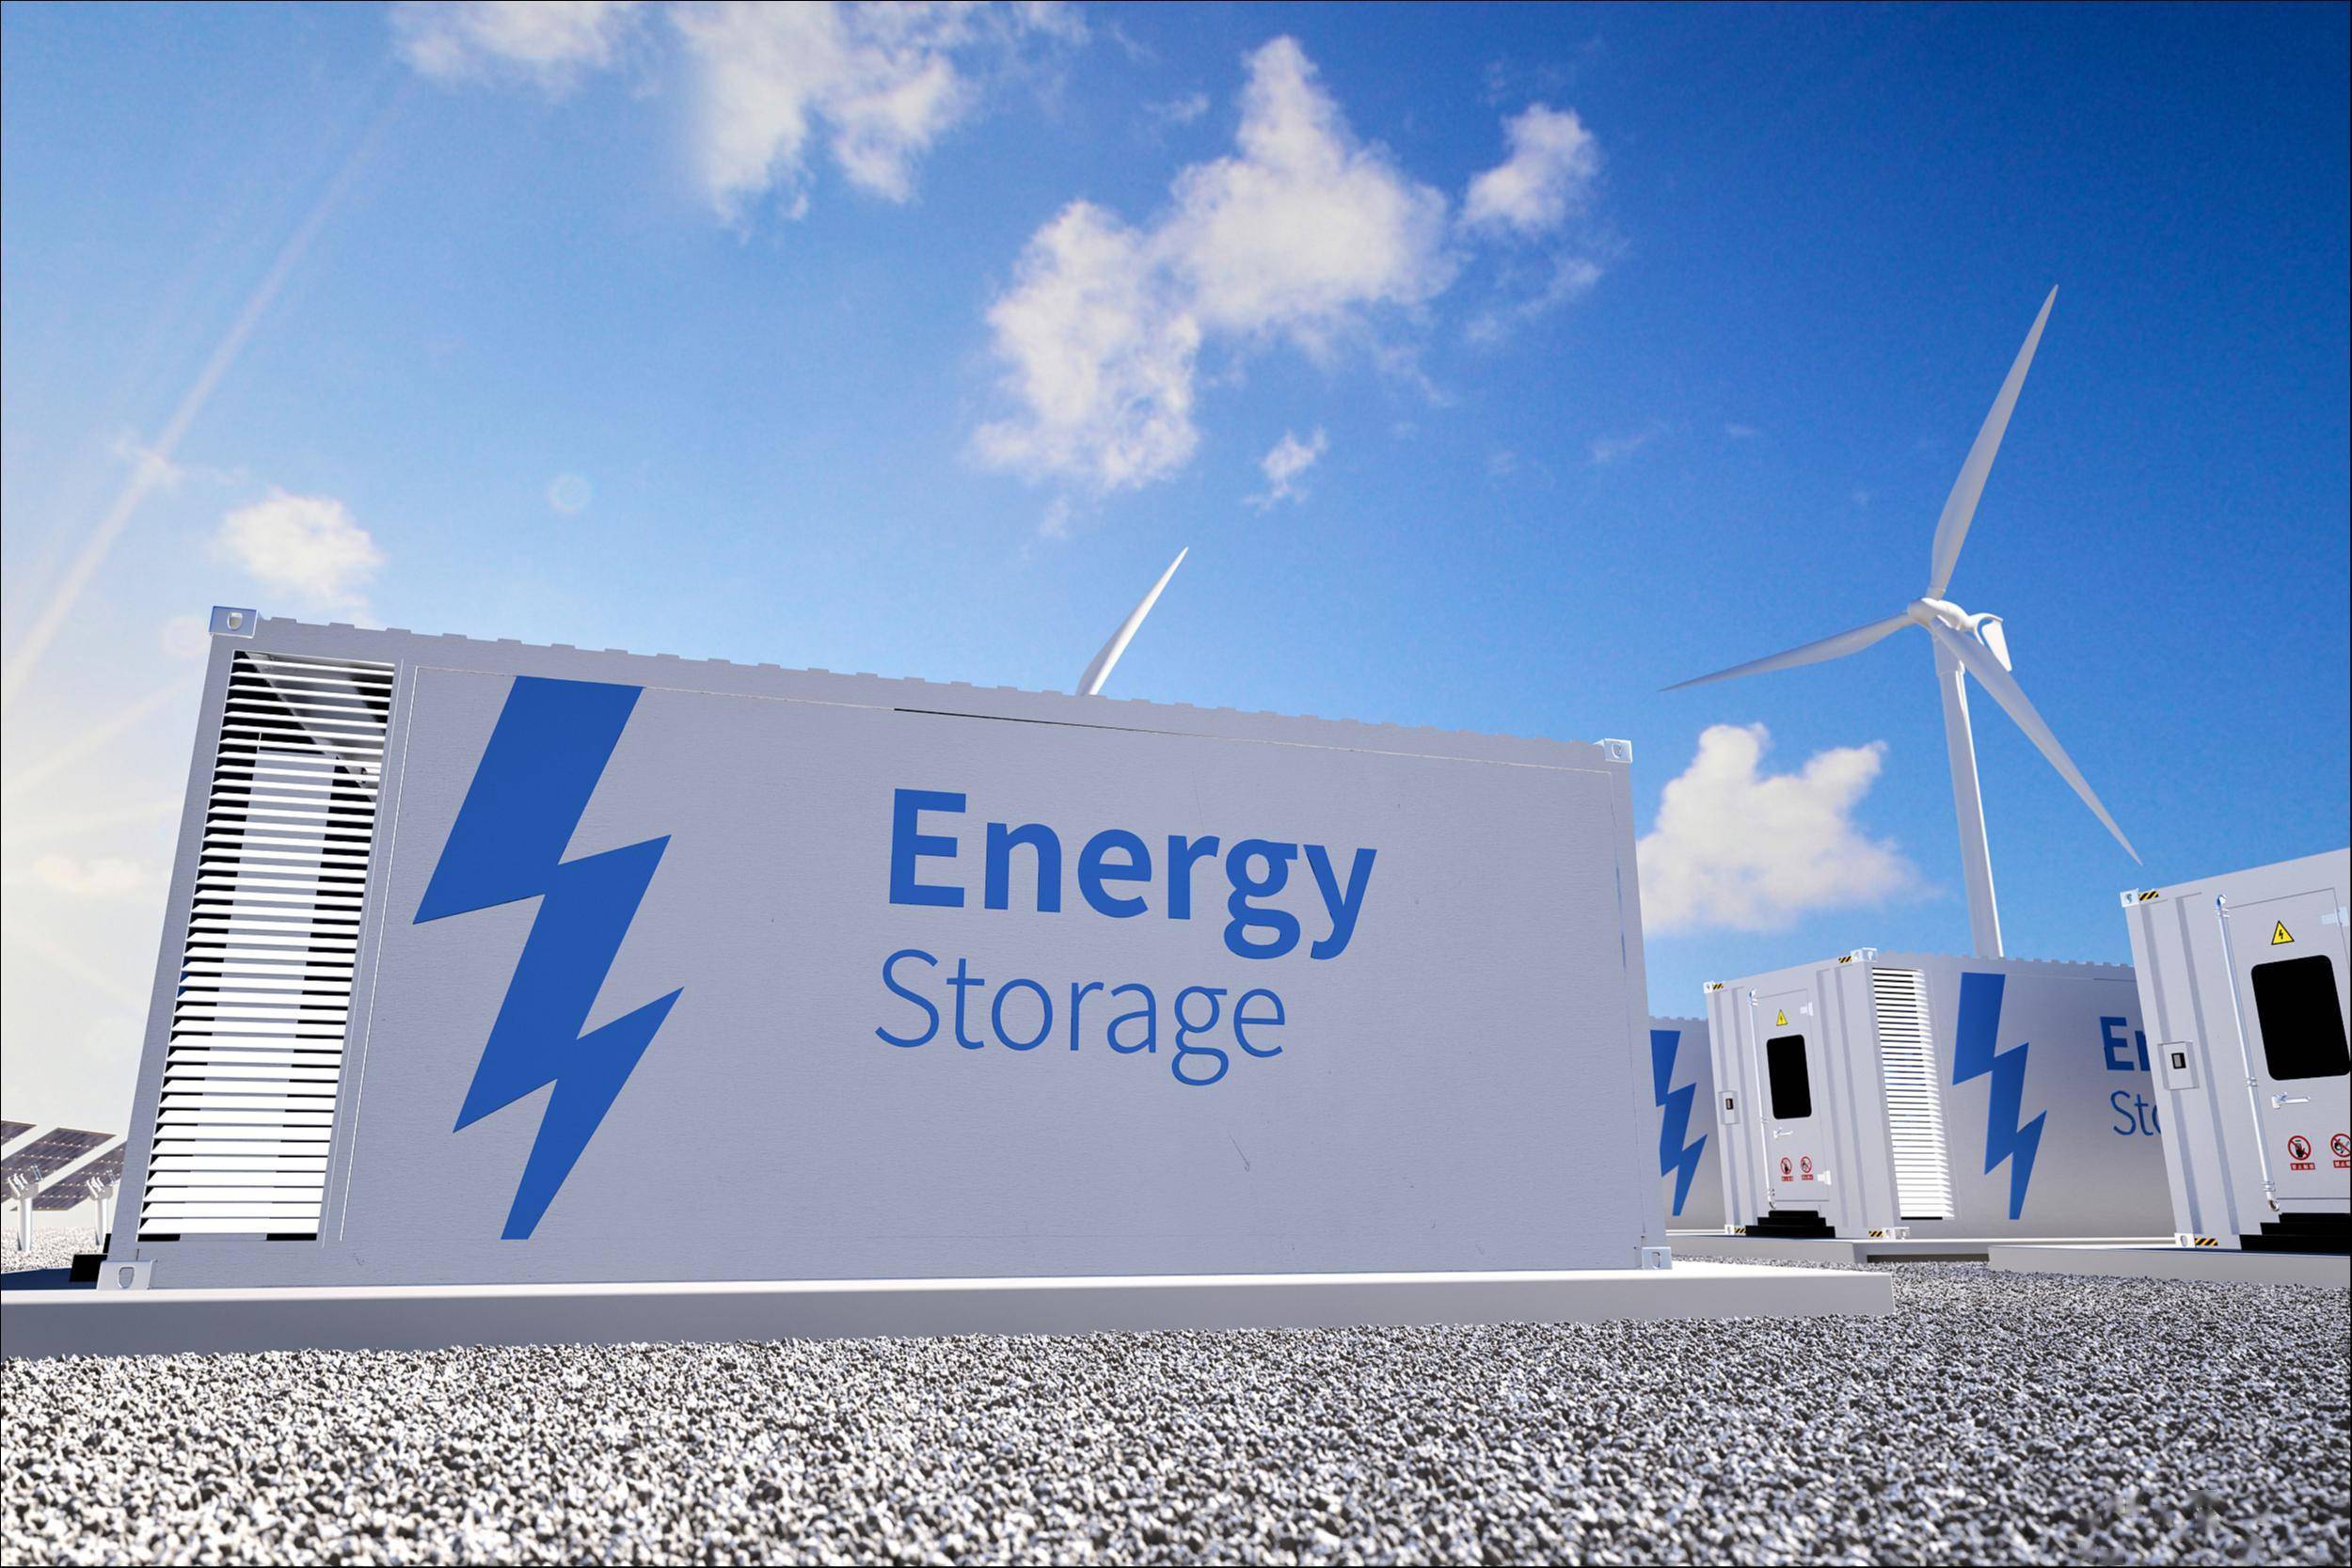 C&I energy storage has become the fastest-growing sector of the energy storage industry